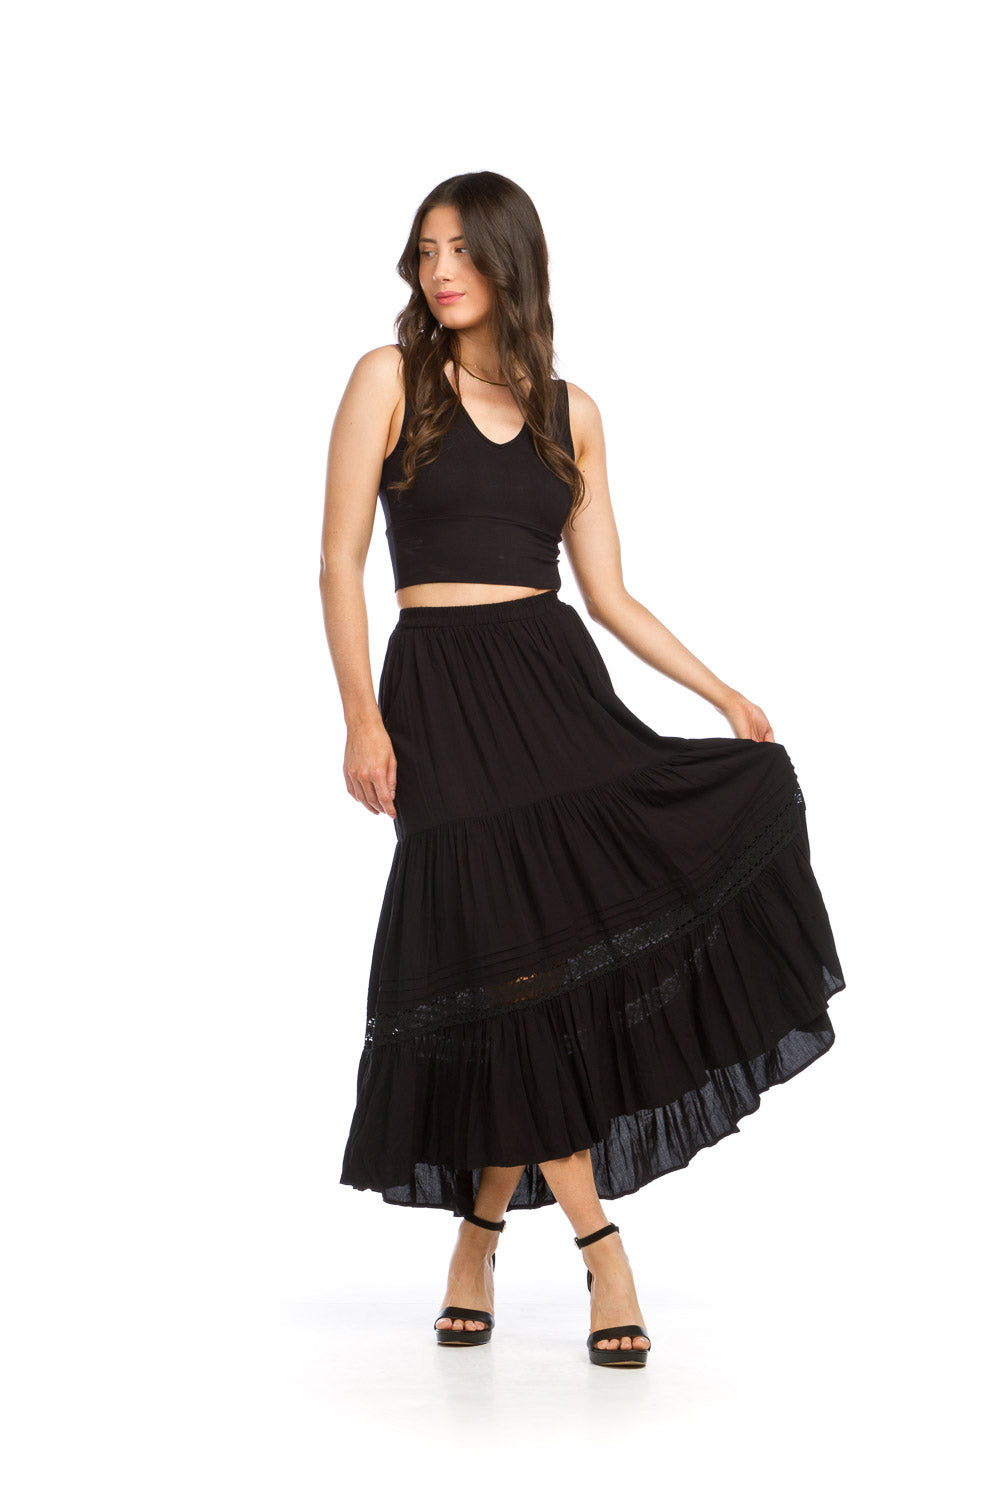 PS16908 BLACK Tiered Elastic Waist Skirt with Lace Inset